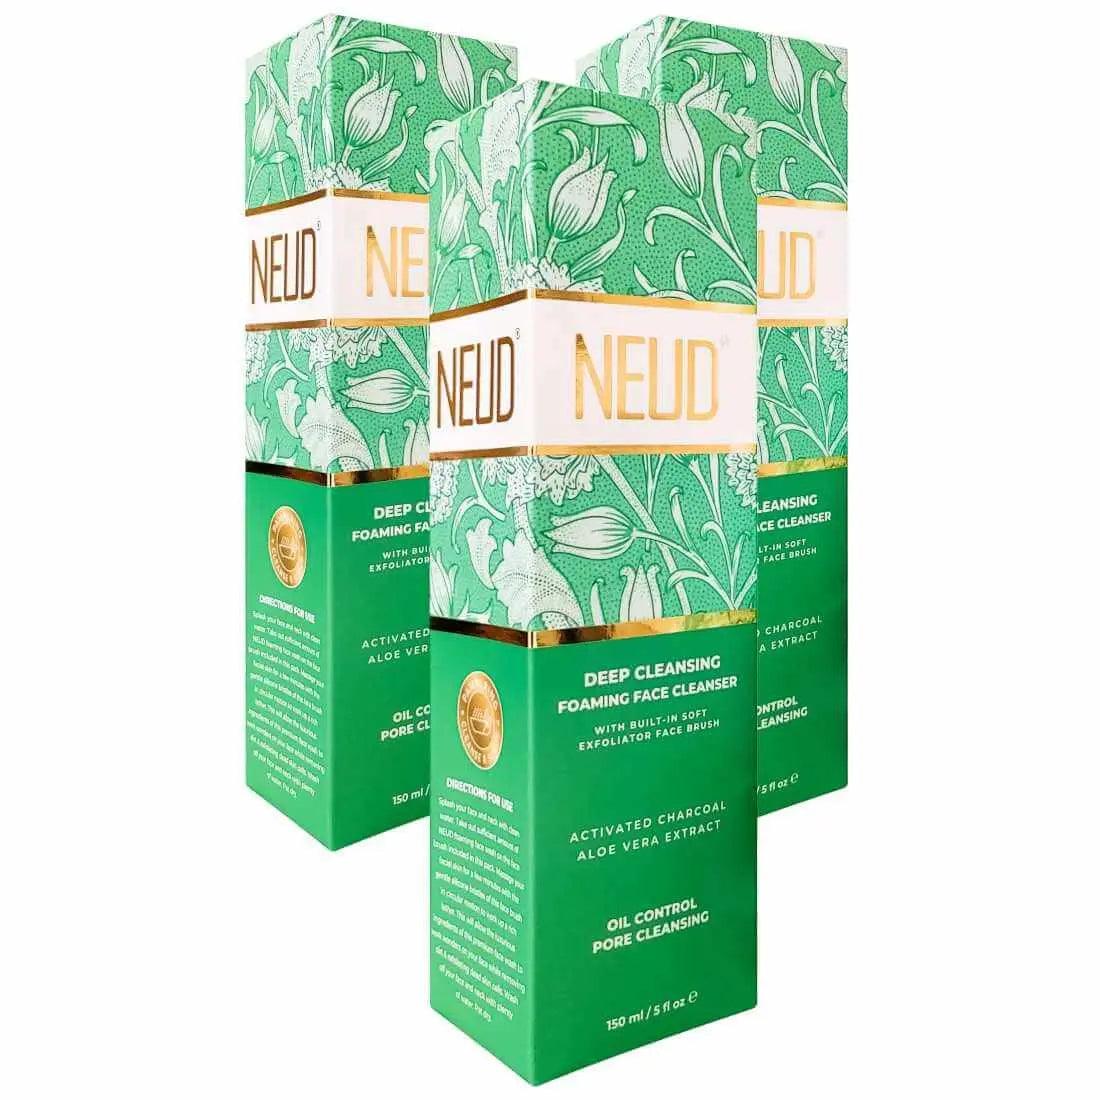 NEUD Deep Cleansing Foaming Face Cleanser With Activated Charcoal and Aloe Vera - 150 ml 9559682309860